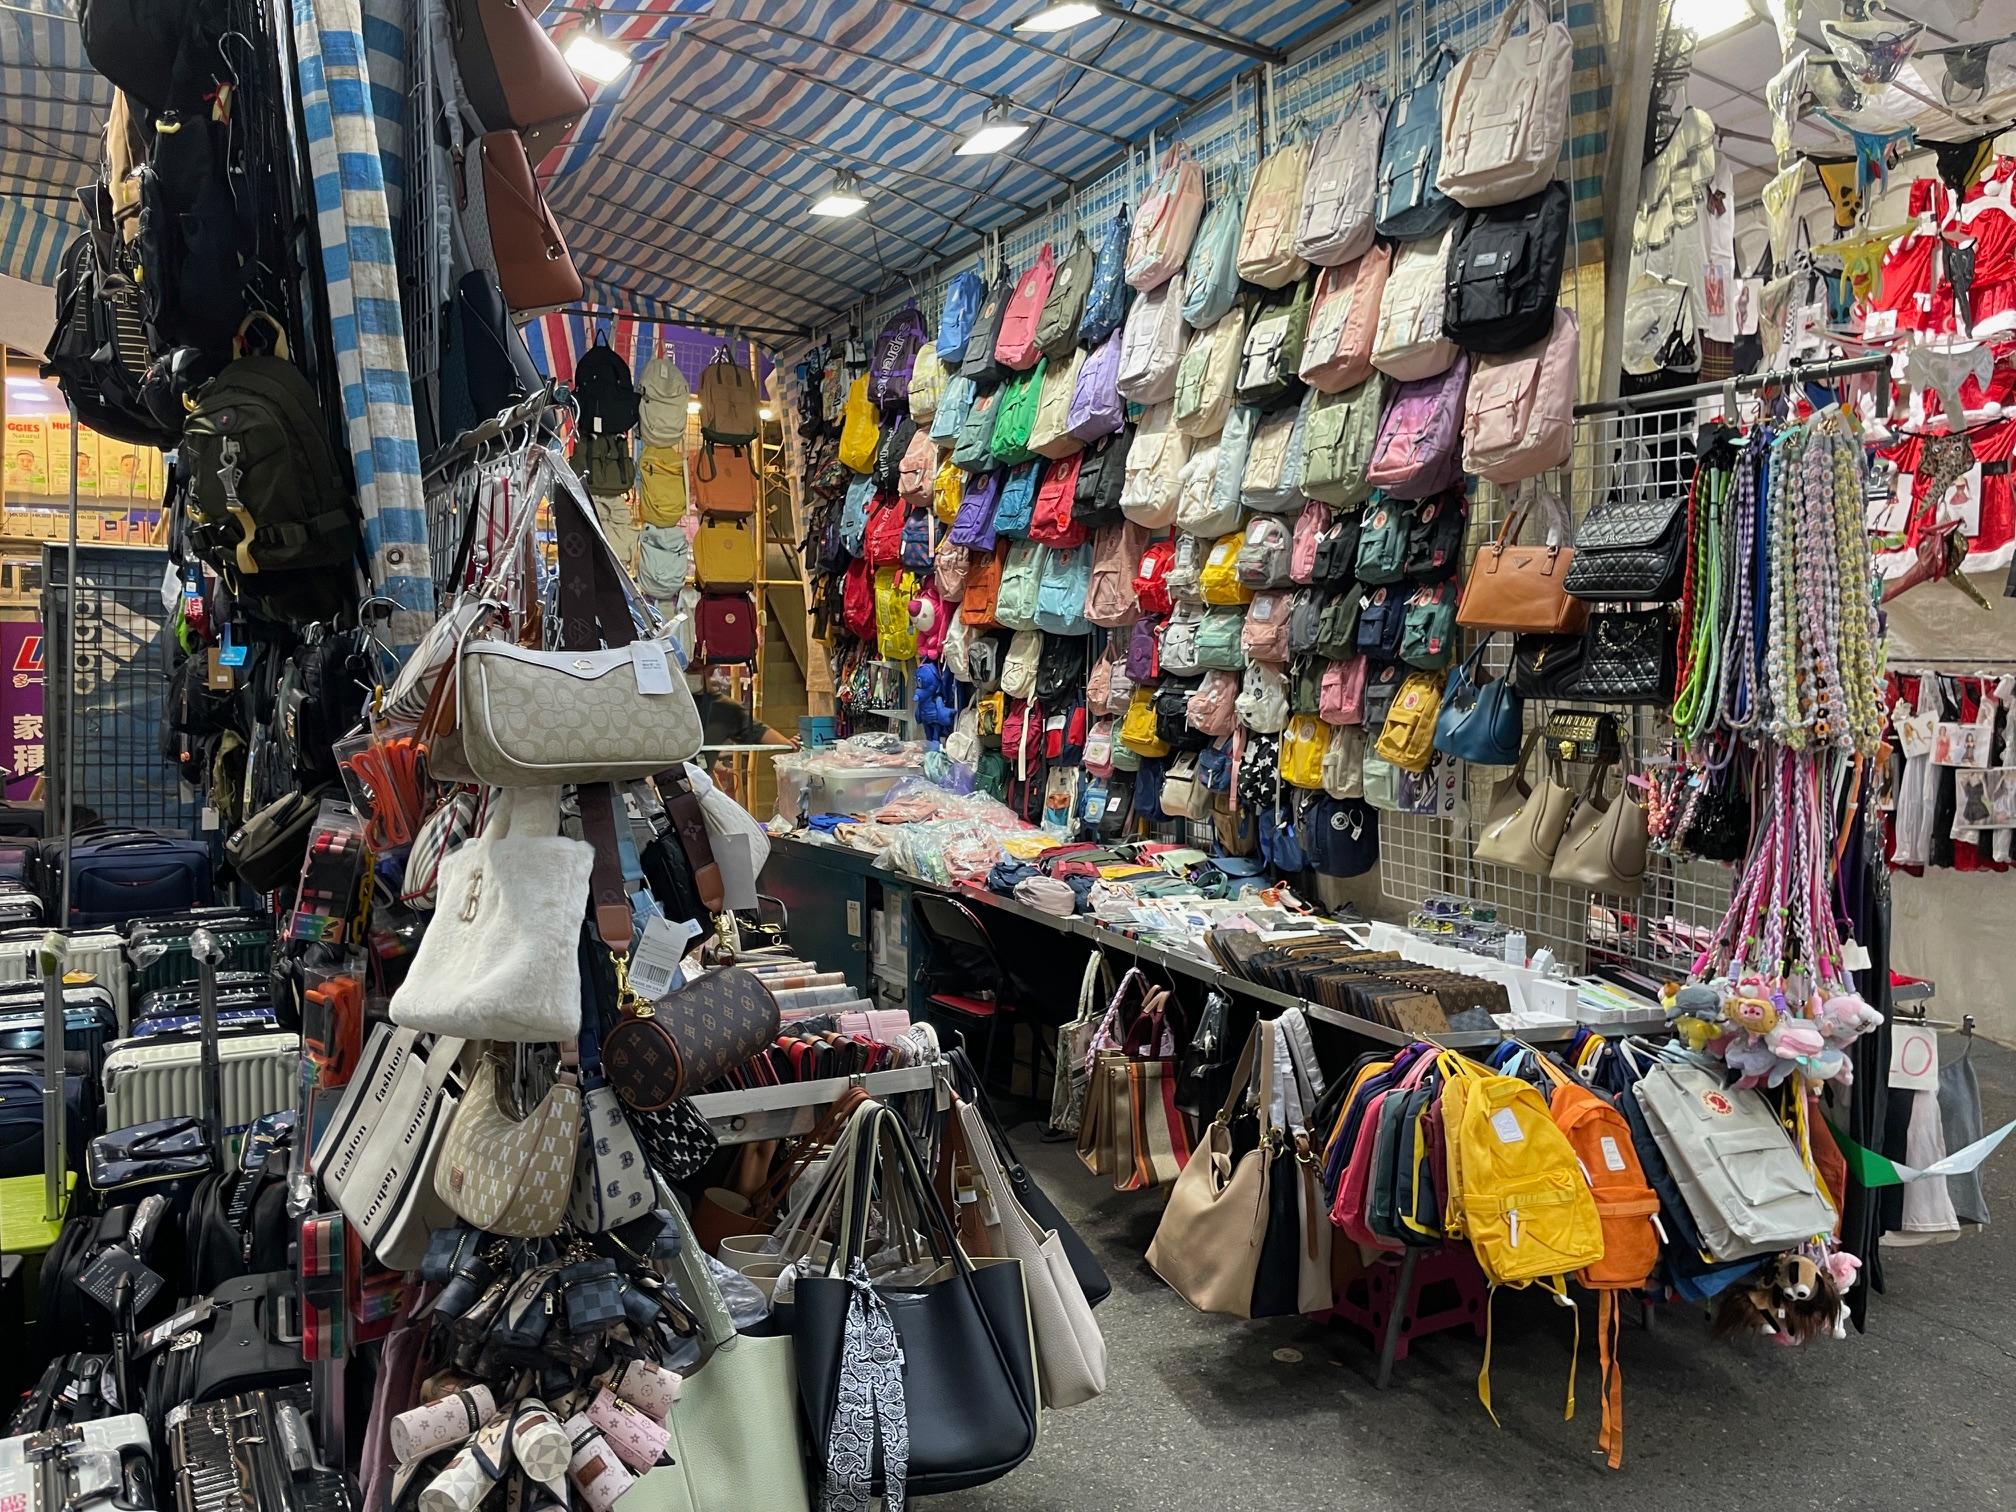 Hong Kong Customs today (December 12) conducted a special operation in Mong Kok to combat the sale of counterfeit goods and seized about 7 000 items of suspected counterfeit goods with an estimated market value of about $900,000. Photo shows one of the fixed-pitch hawker stalls raided by Customs officers.
